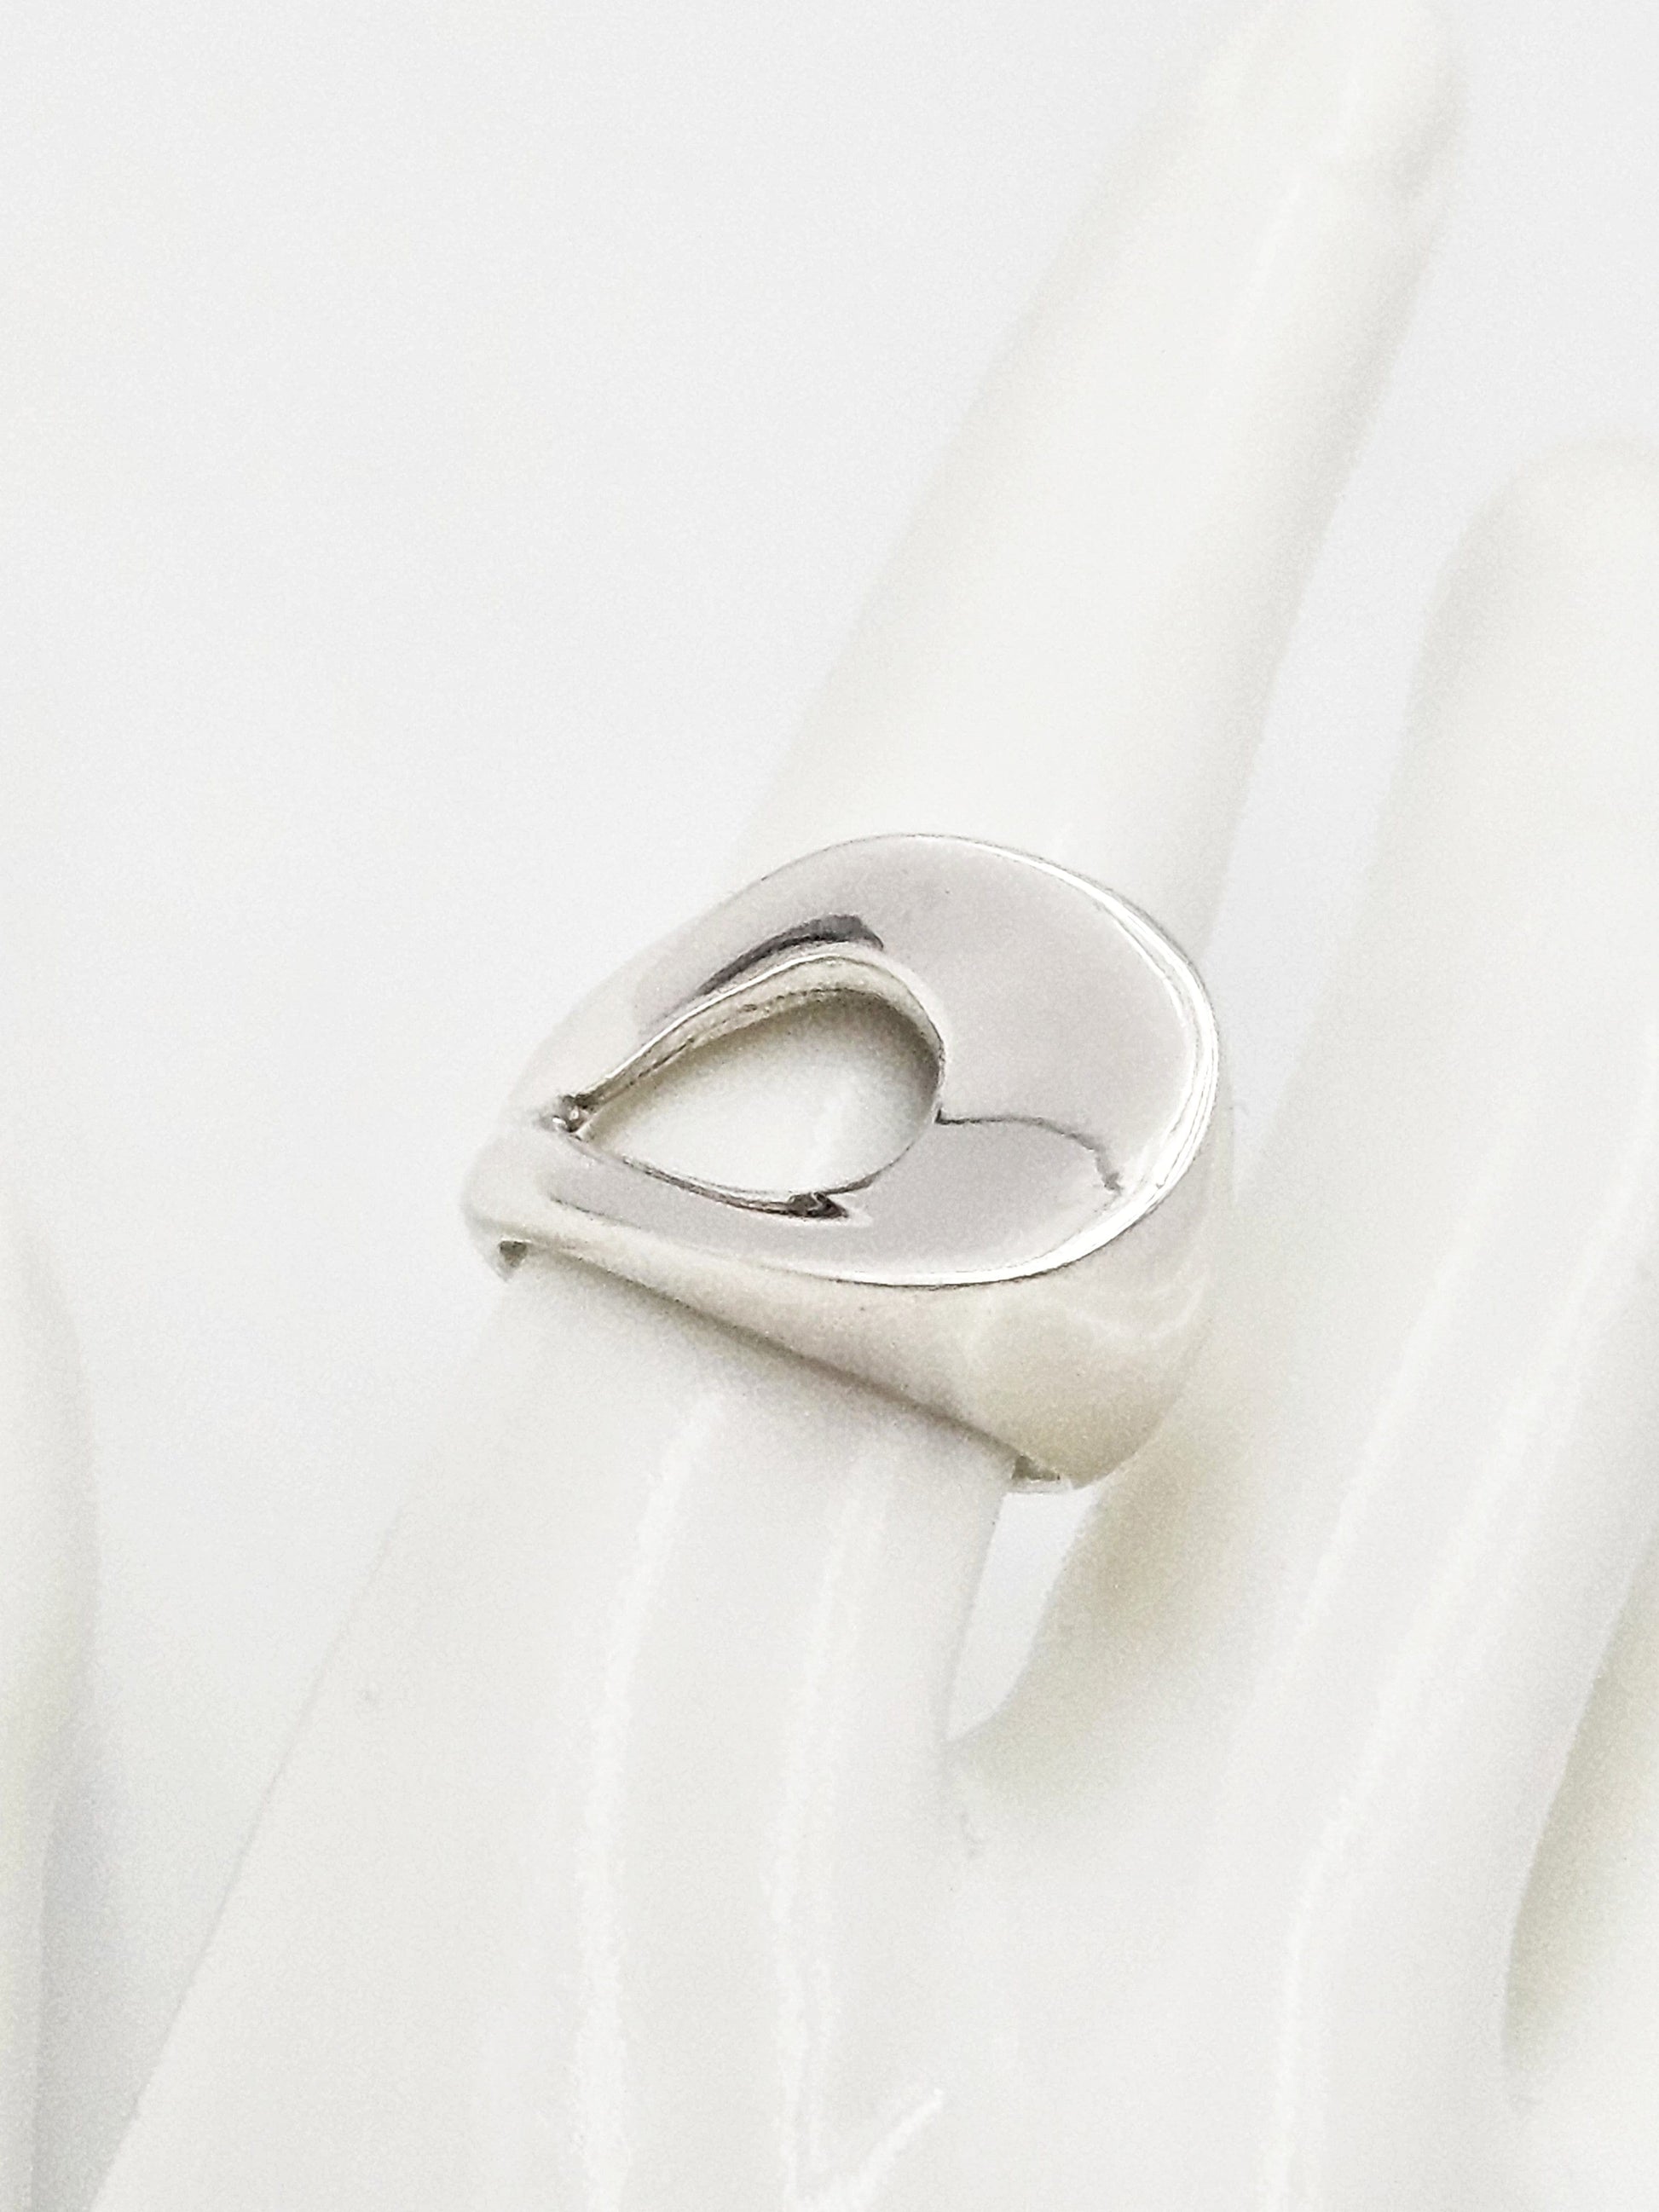 TMCMH Jewelry Vintage Sterling Silver Scandinavian Modernist Cocktail Ring